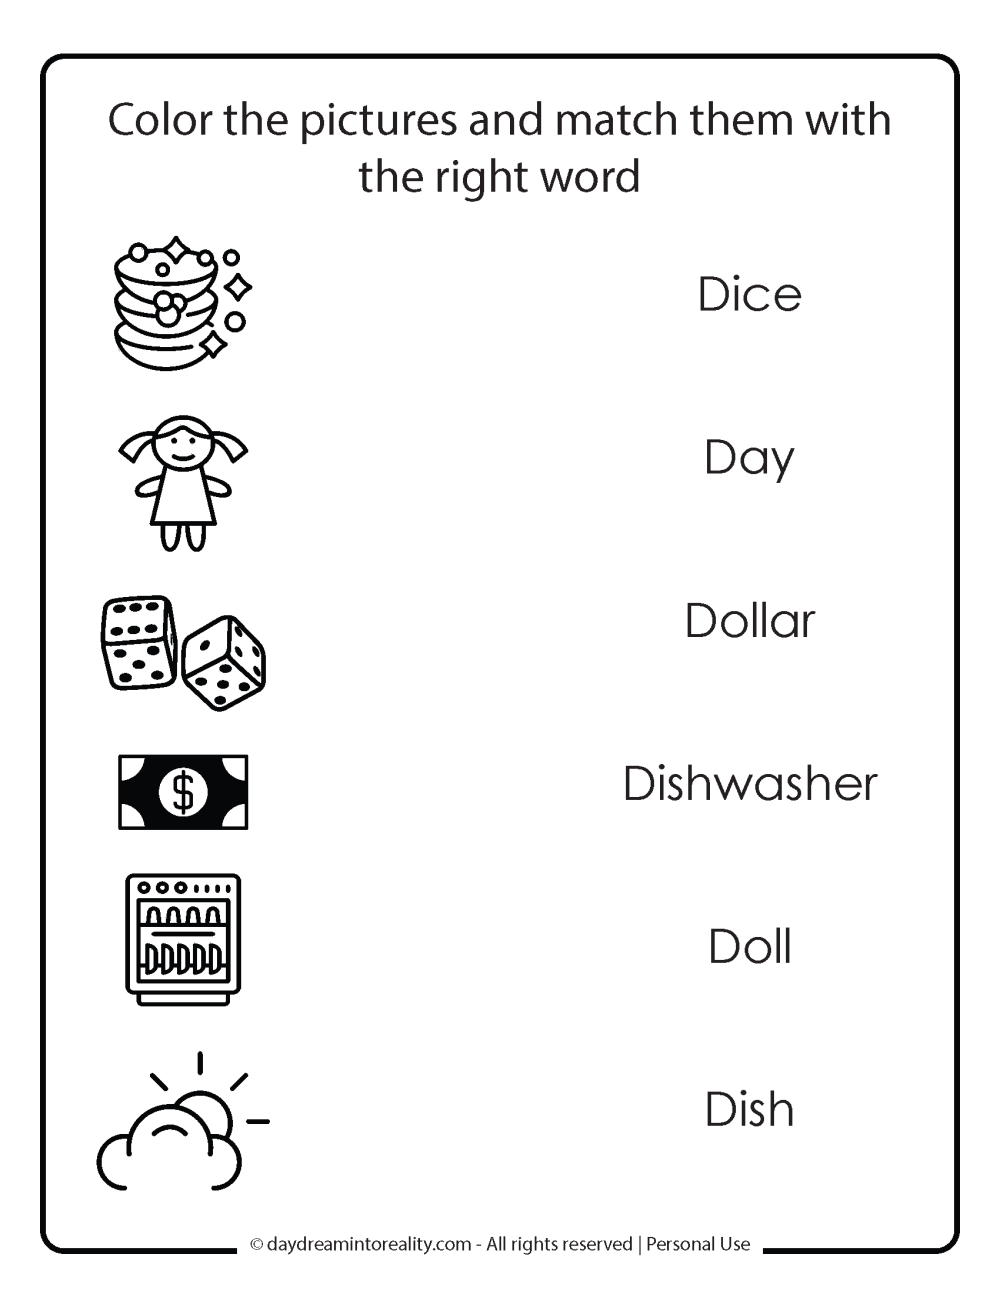 Letter D worksheet free printables. Match the pictures with words that start with d.